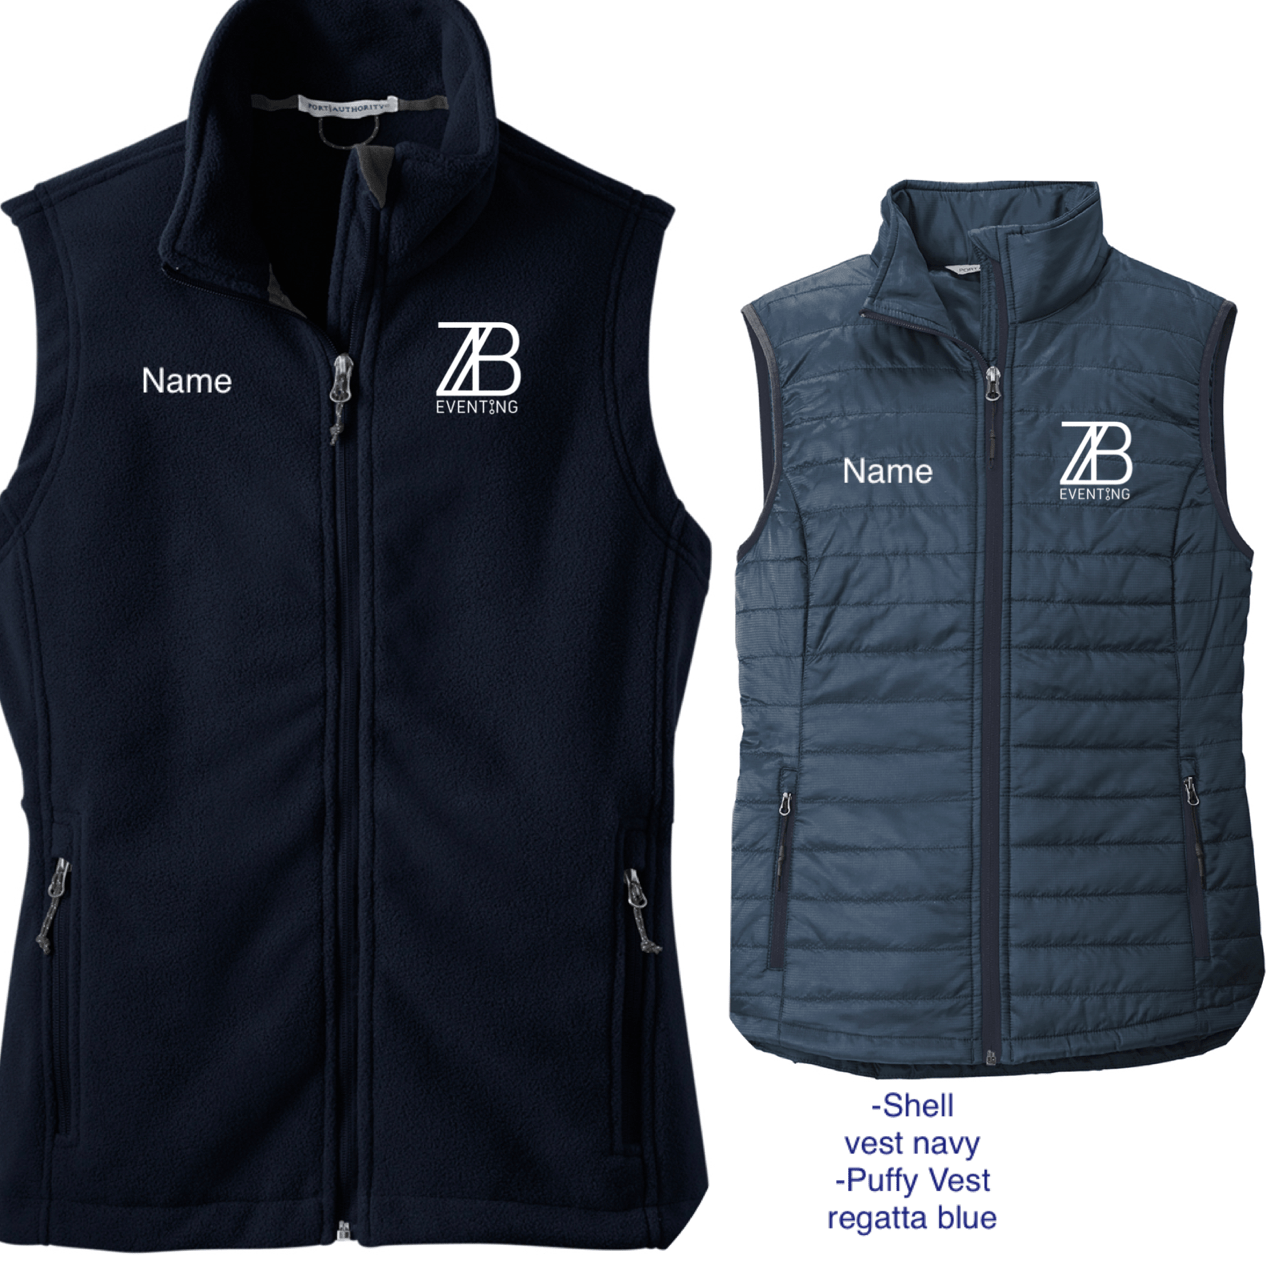 Equestrian Team Apparel Custom Team Shirts ZB Eventing Vest equestrian team apparel online tack store mobile tack store custom farm apparel custom show stable clothing equestrian lifestyle horse show clothing riding clothes horses equestrian tack store